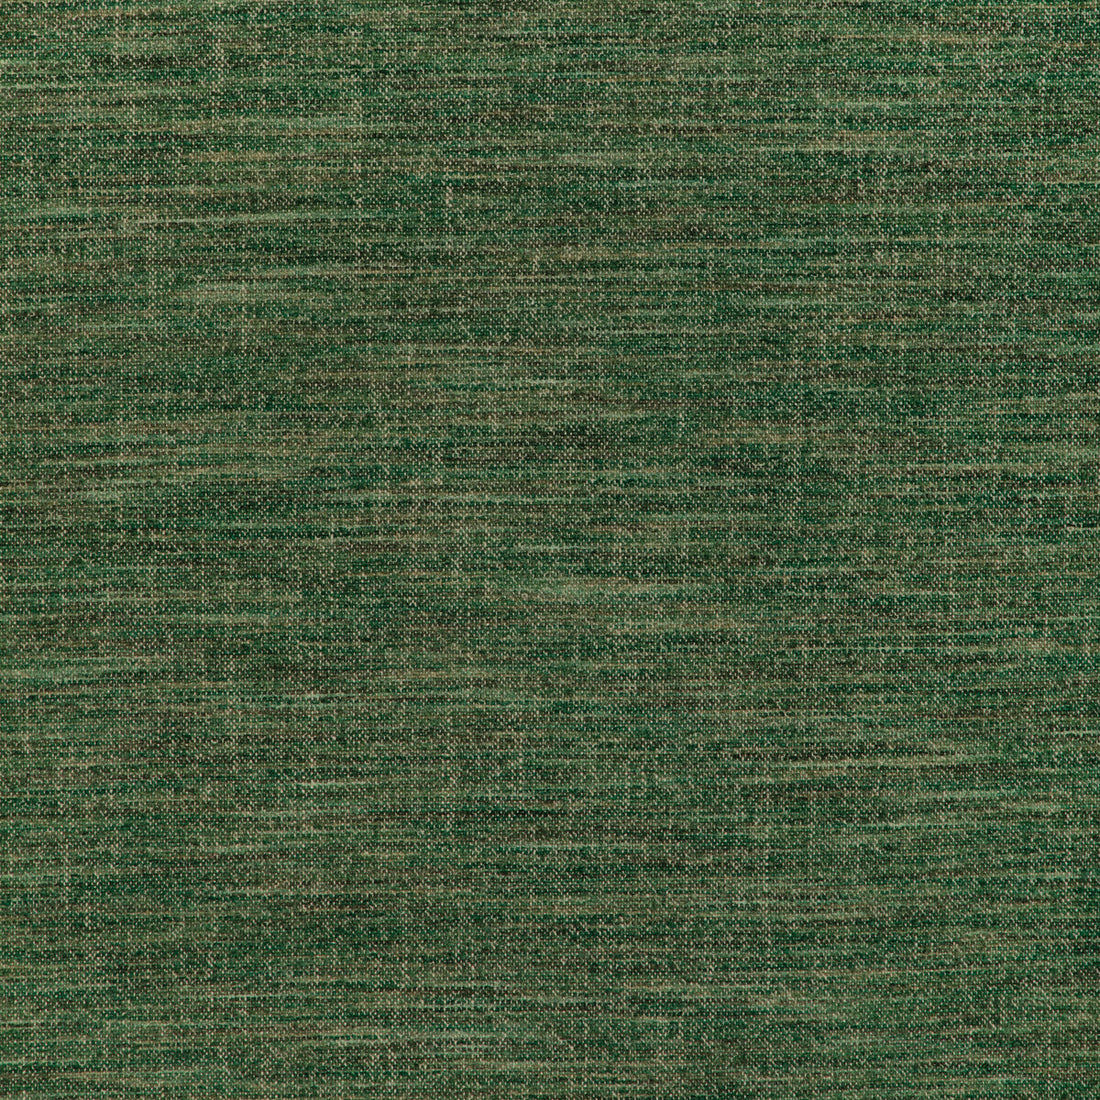 Combes Texture fabric in forest color - pattern 8023131.33.0 - by Brunschwig &amp; Fils in the Arles Weaves collection